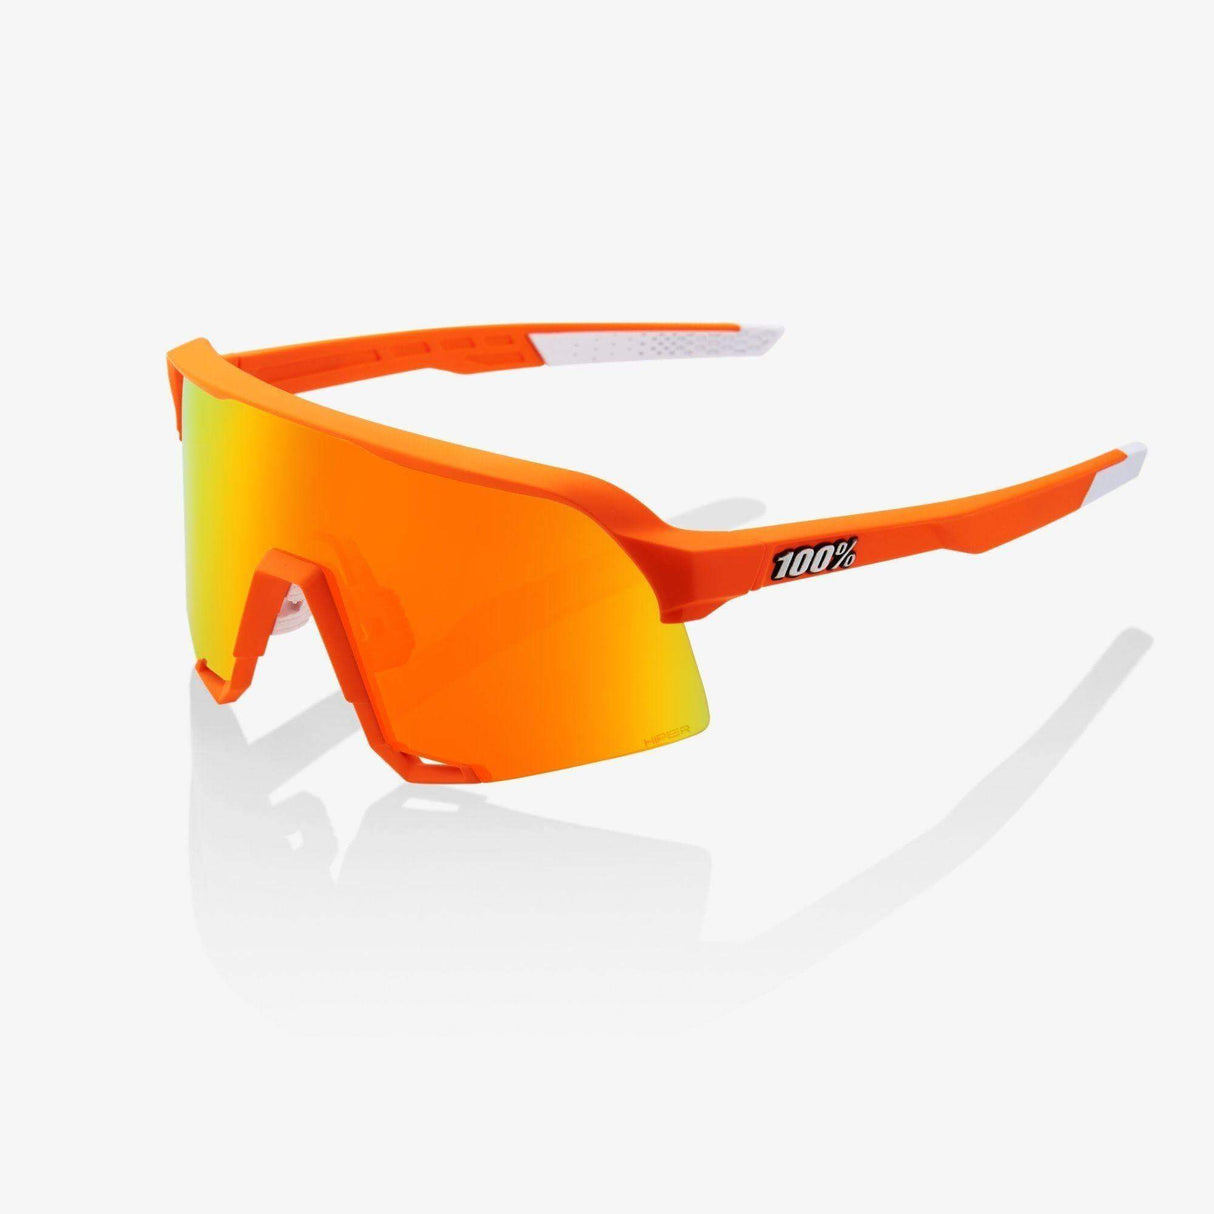 100% S3 - Neon Orange - HiPER Red Multilayer Mirror lens | Strictly Bicycles